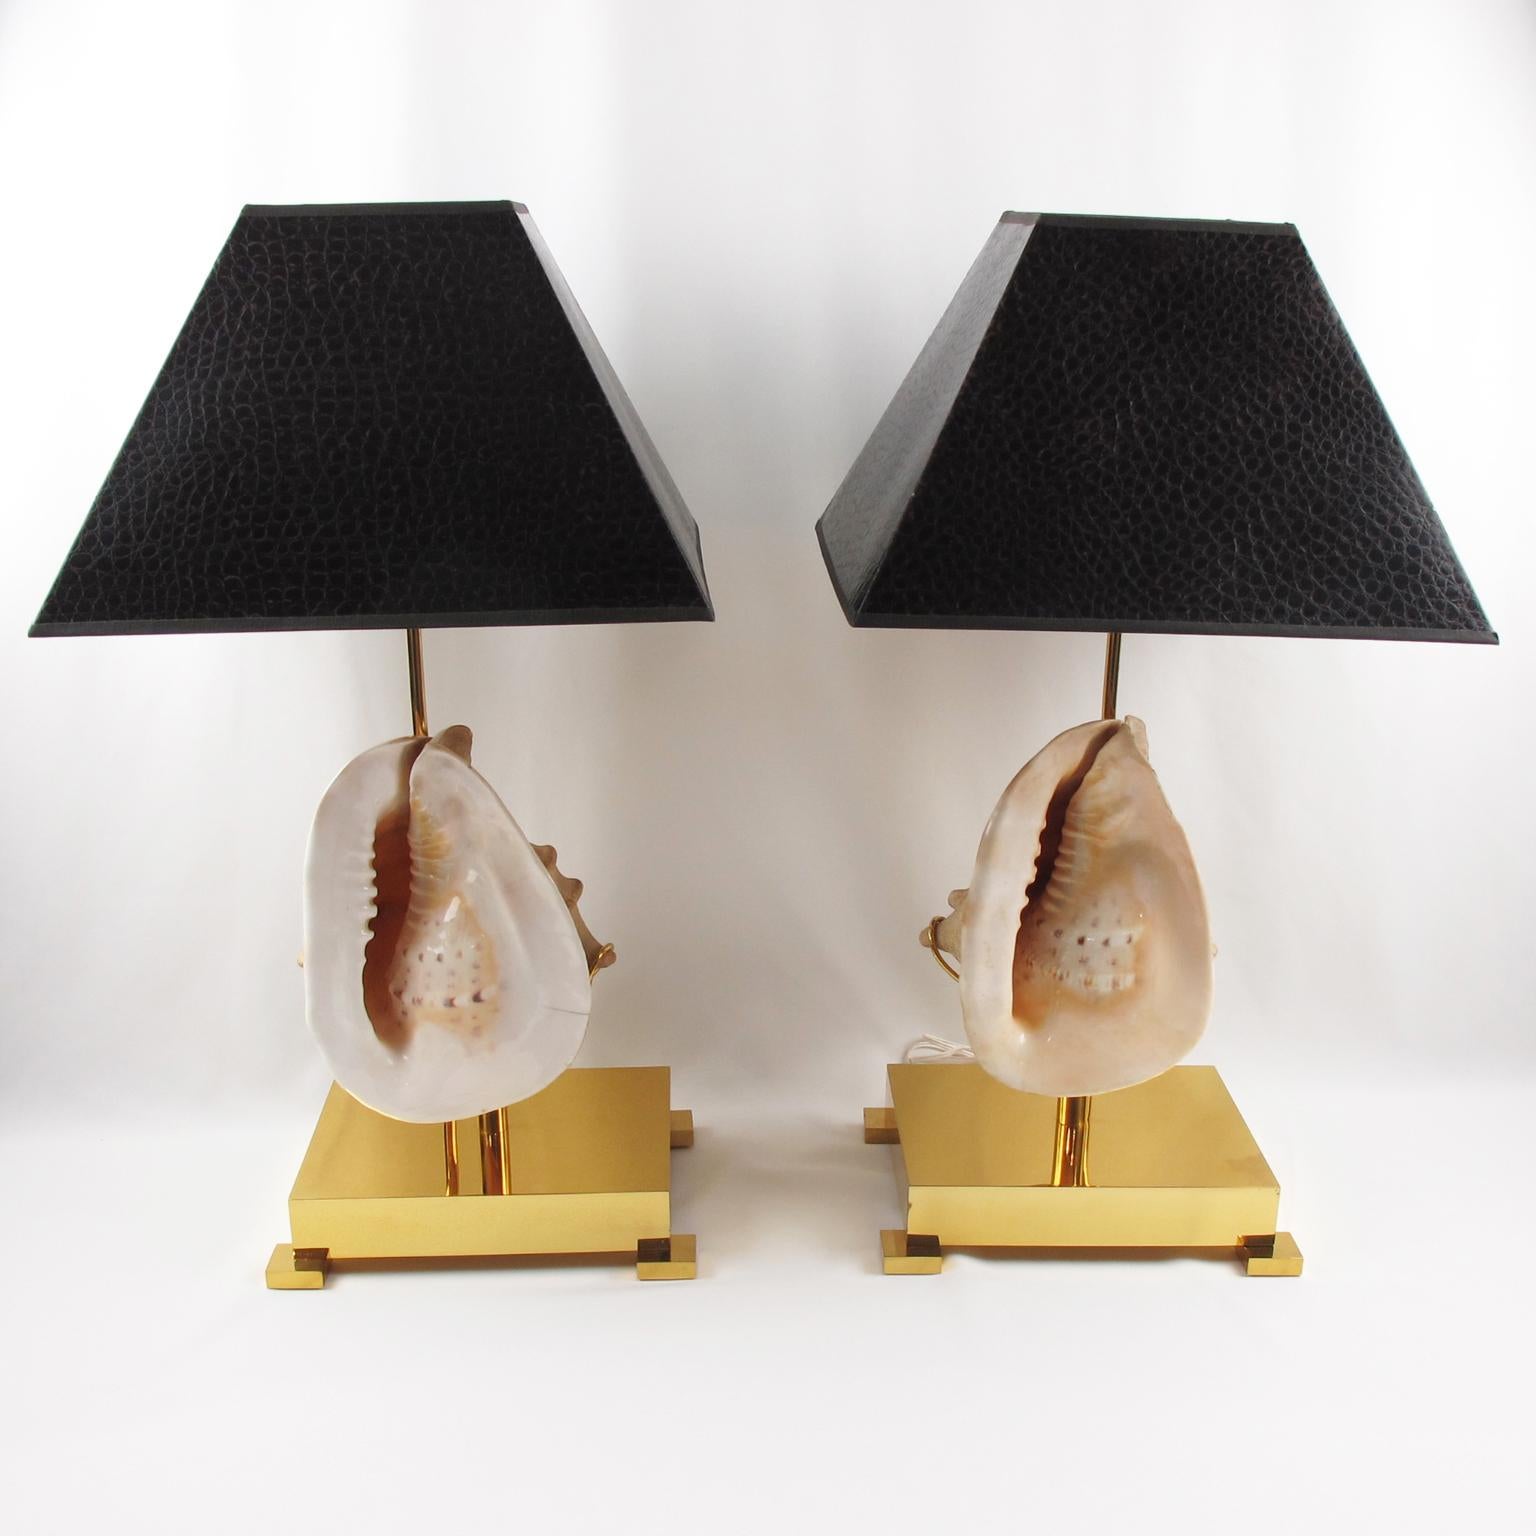 Willy Daro designed these stunning table lamps in the 1970s. This pair of lamps boast oversized sea shells mounted on a square polished brass base. 
The lampshades are geometrically shaped in dark brown color with a textured faux crocodile skin